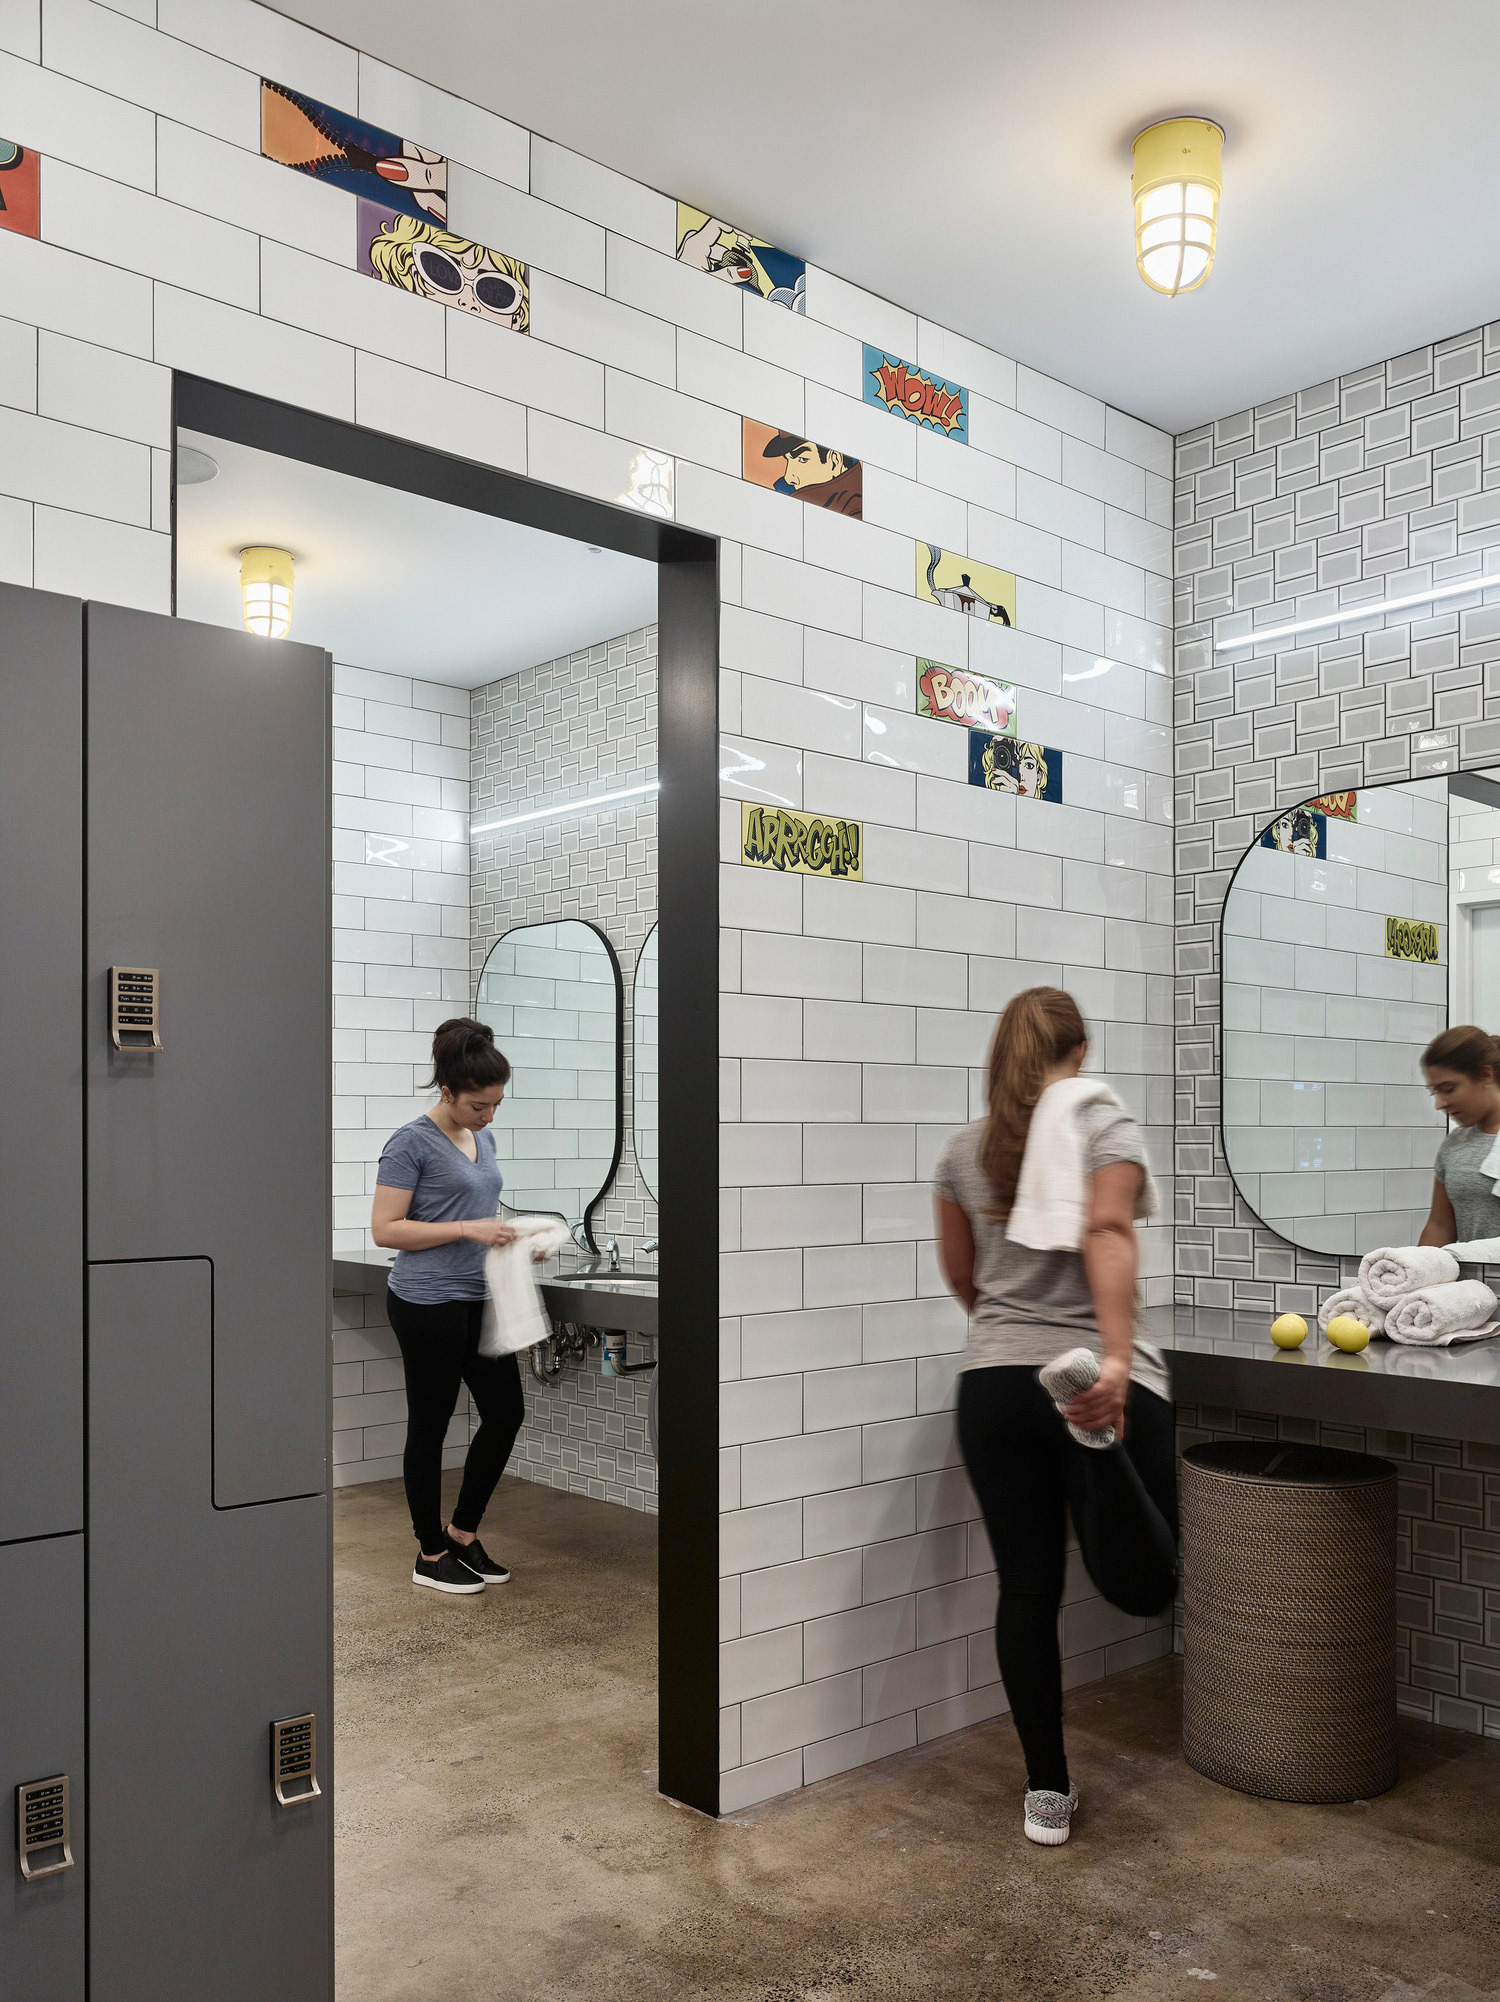 Modern restroom design with white subway tiles walls and decorative border featuring colorful illustrations. Twin circular mirrors hang over a sleek basin counter, while an industrial-style black doorframe contrasts the space. The contemporary aesthetic is complemented by warm, diffused lighting from pendant lamps.